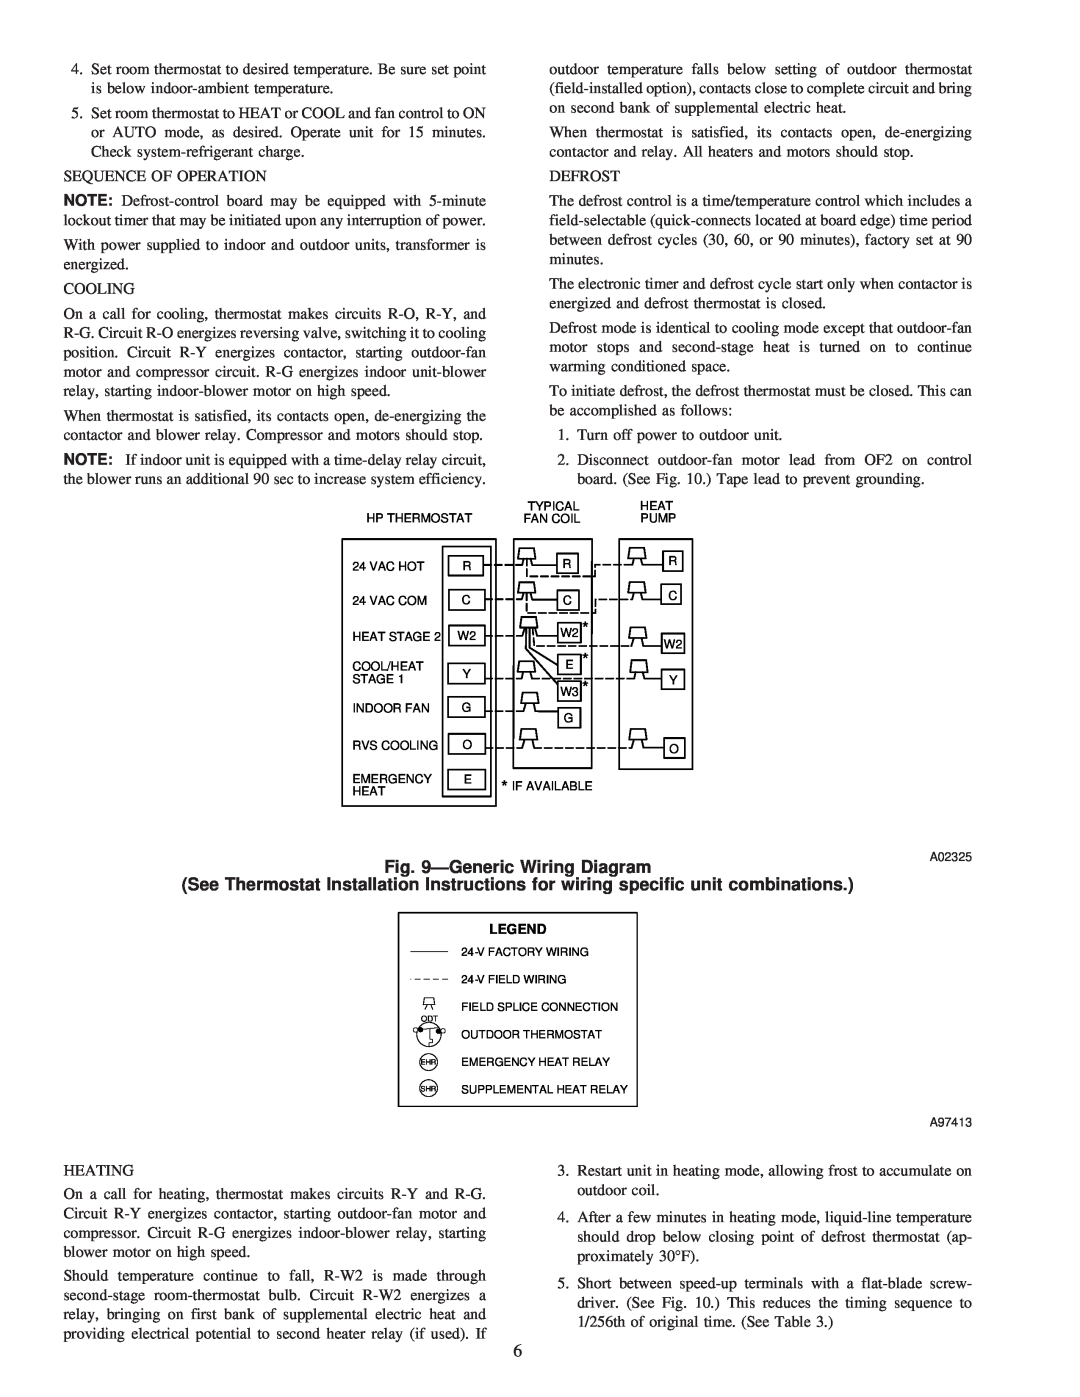 Carrier 38BYC, 38BYG instruction manual GenericWiring Diagram 